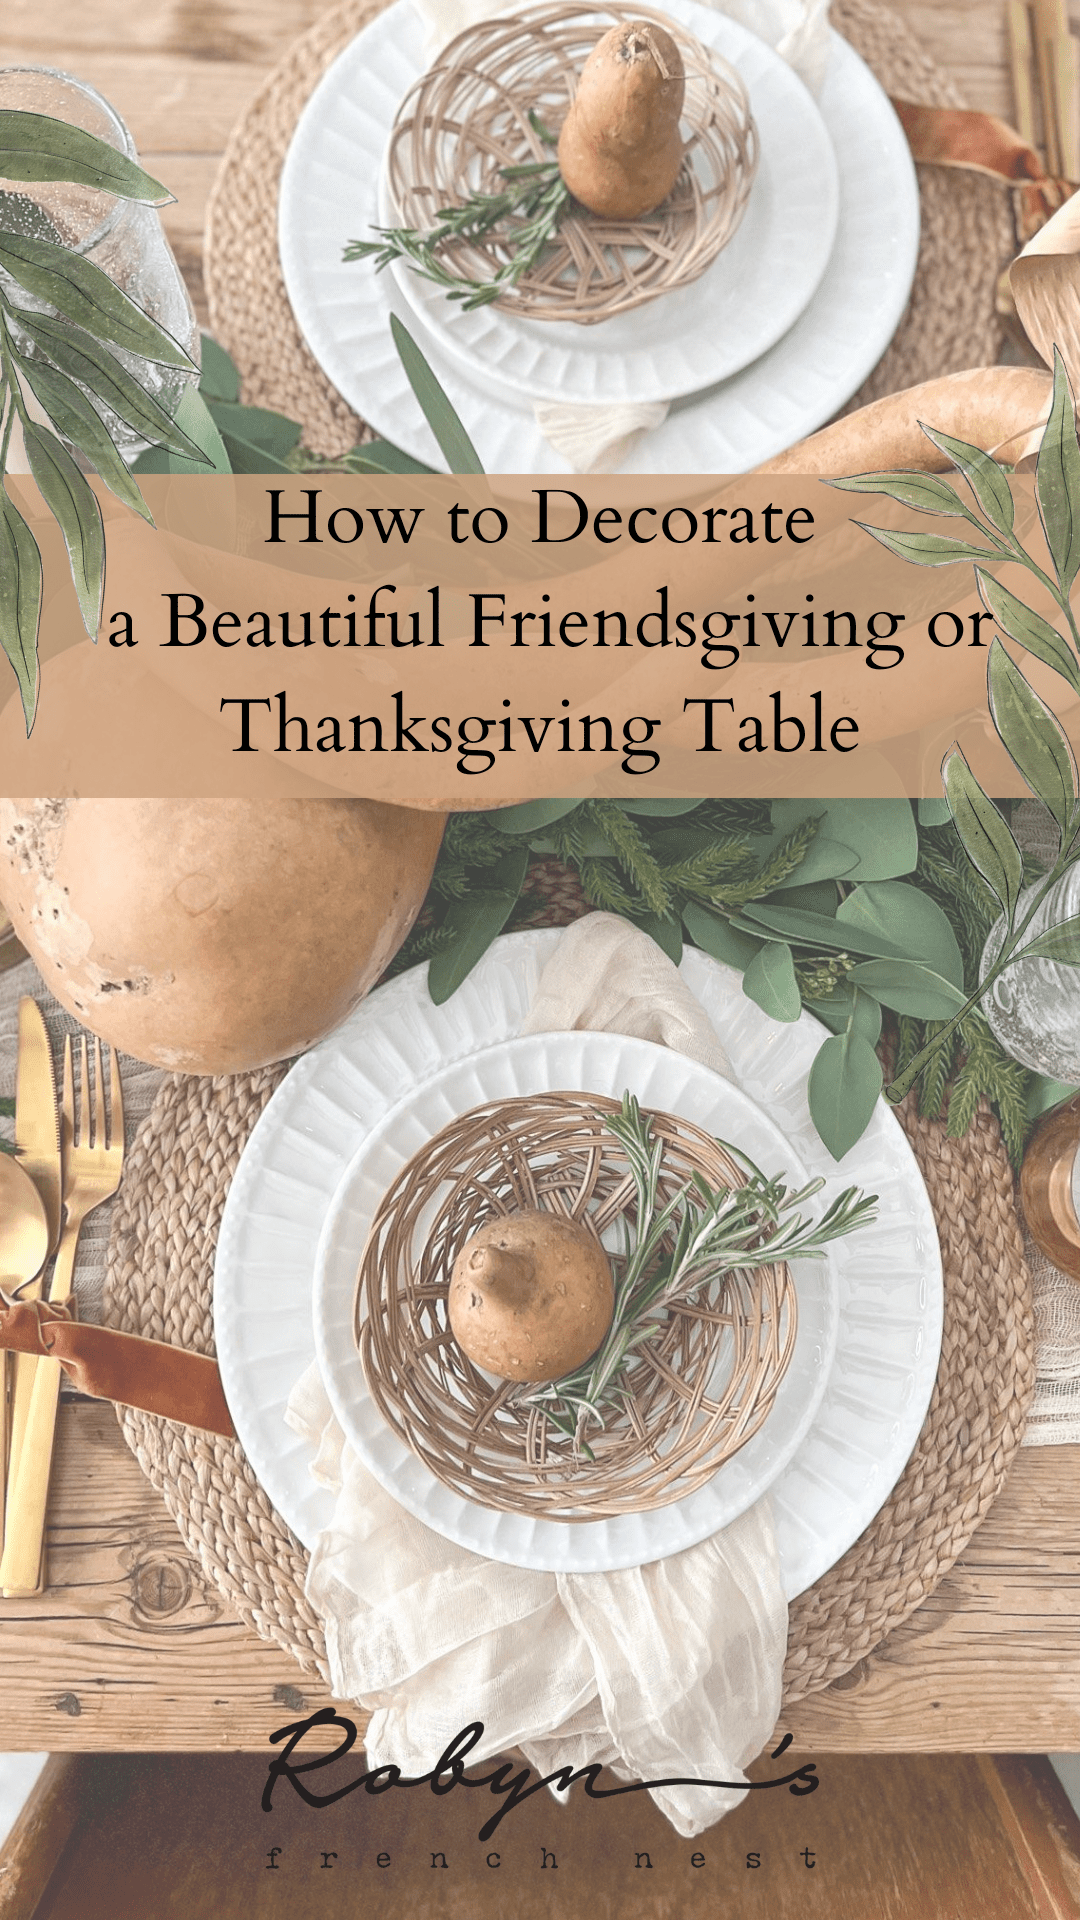 How to Create Easy Friendsgiving Table Settings and Thanksgiving Decor